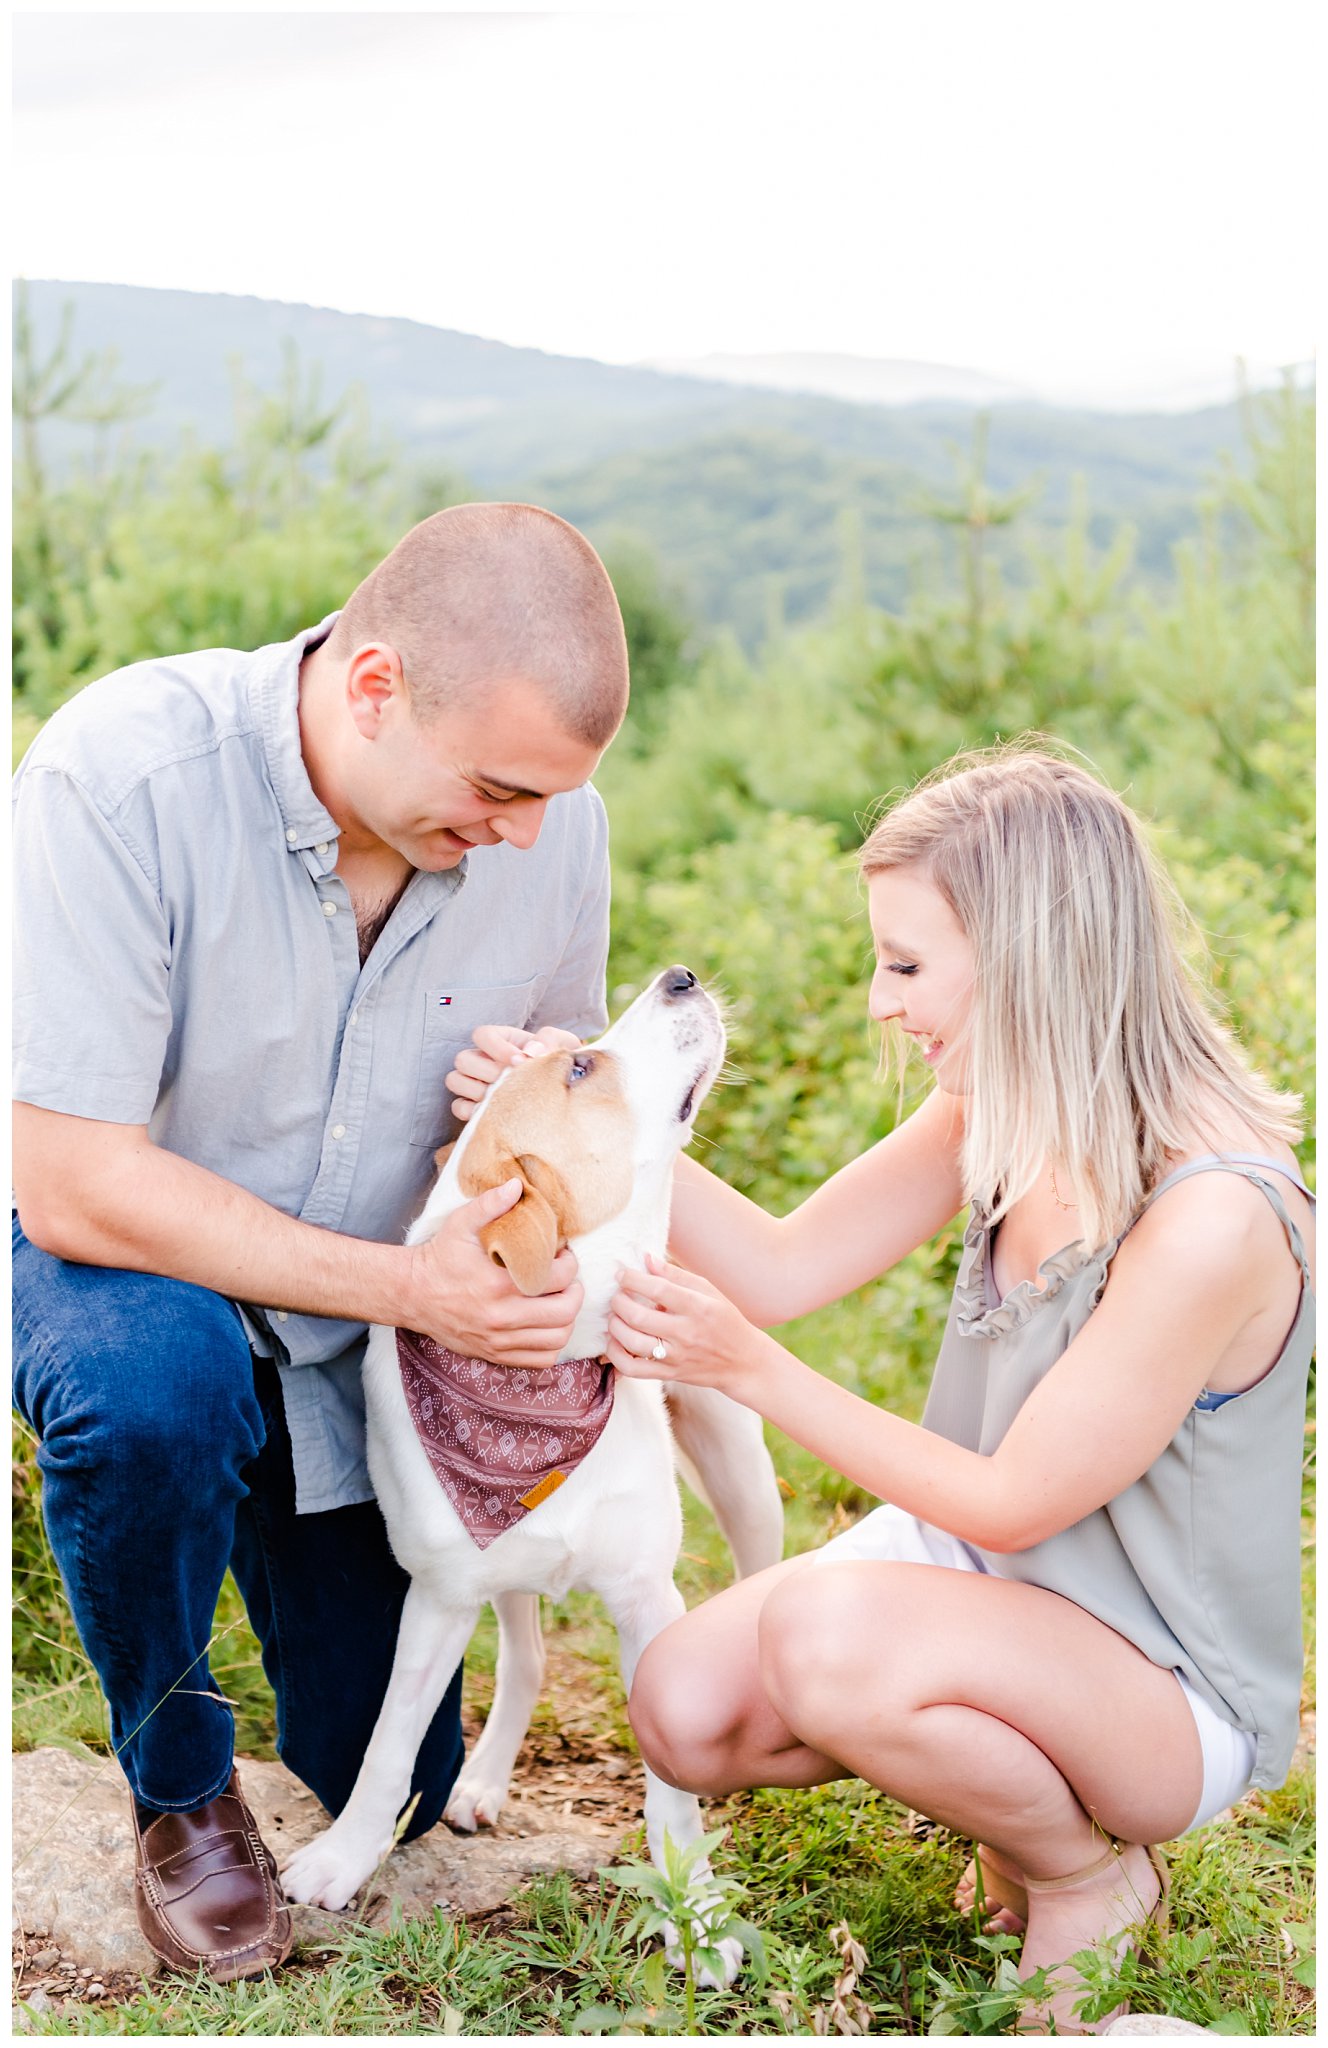 couple poses with dog for their anniversary session in the blue ridge mountains